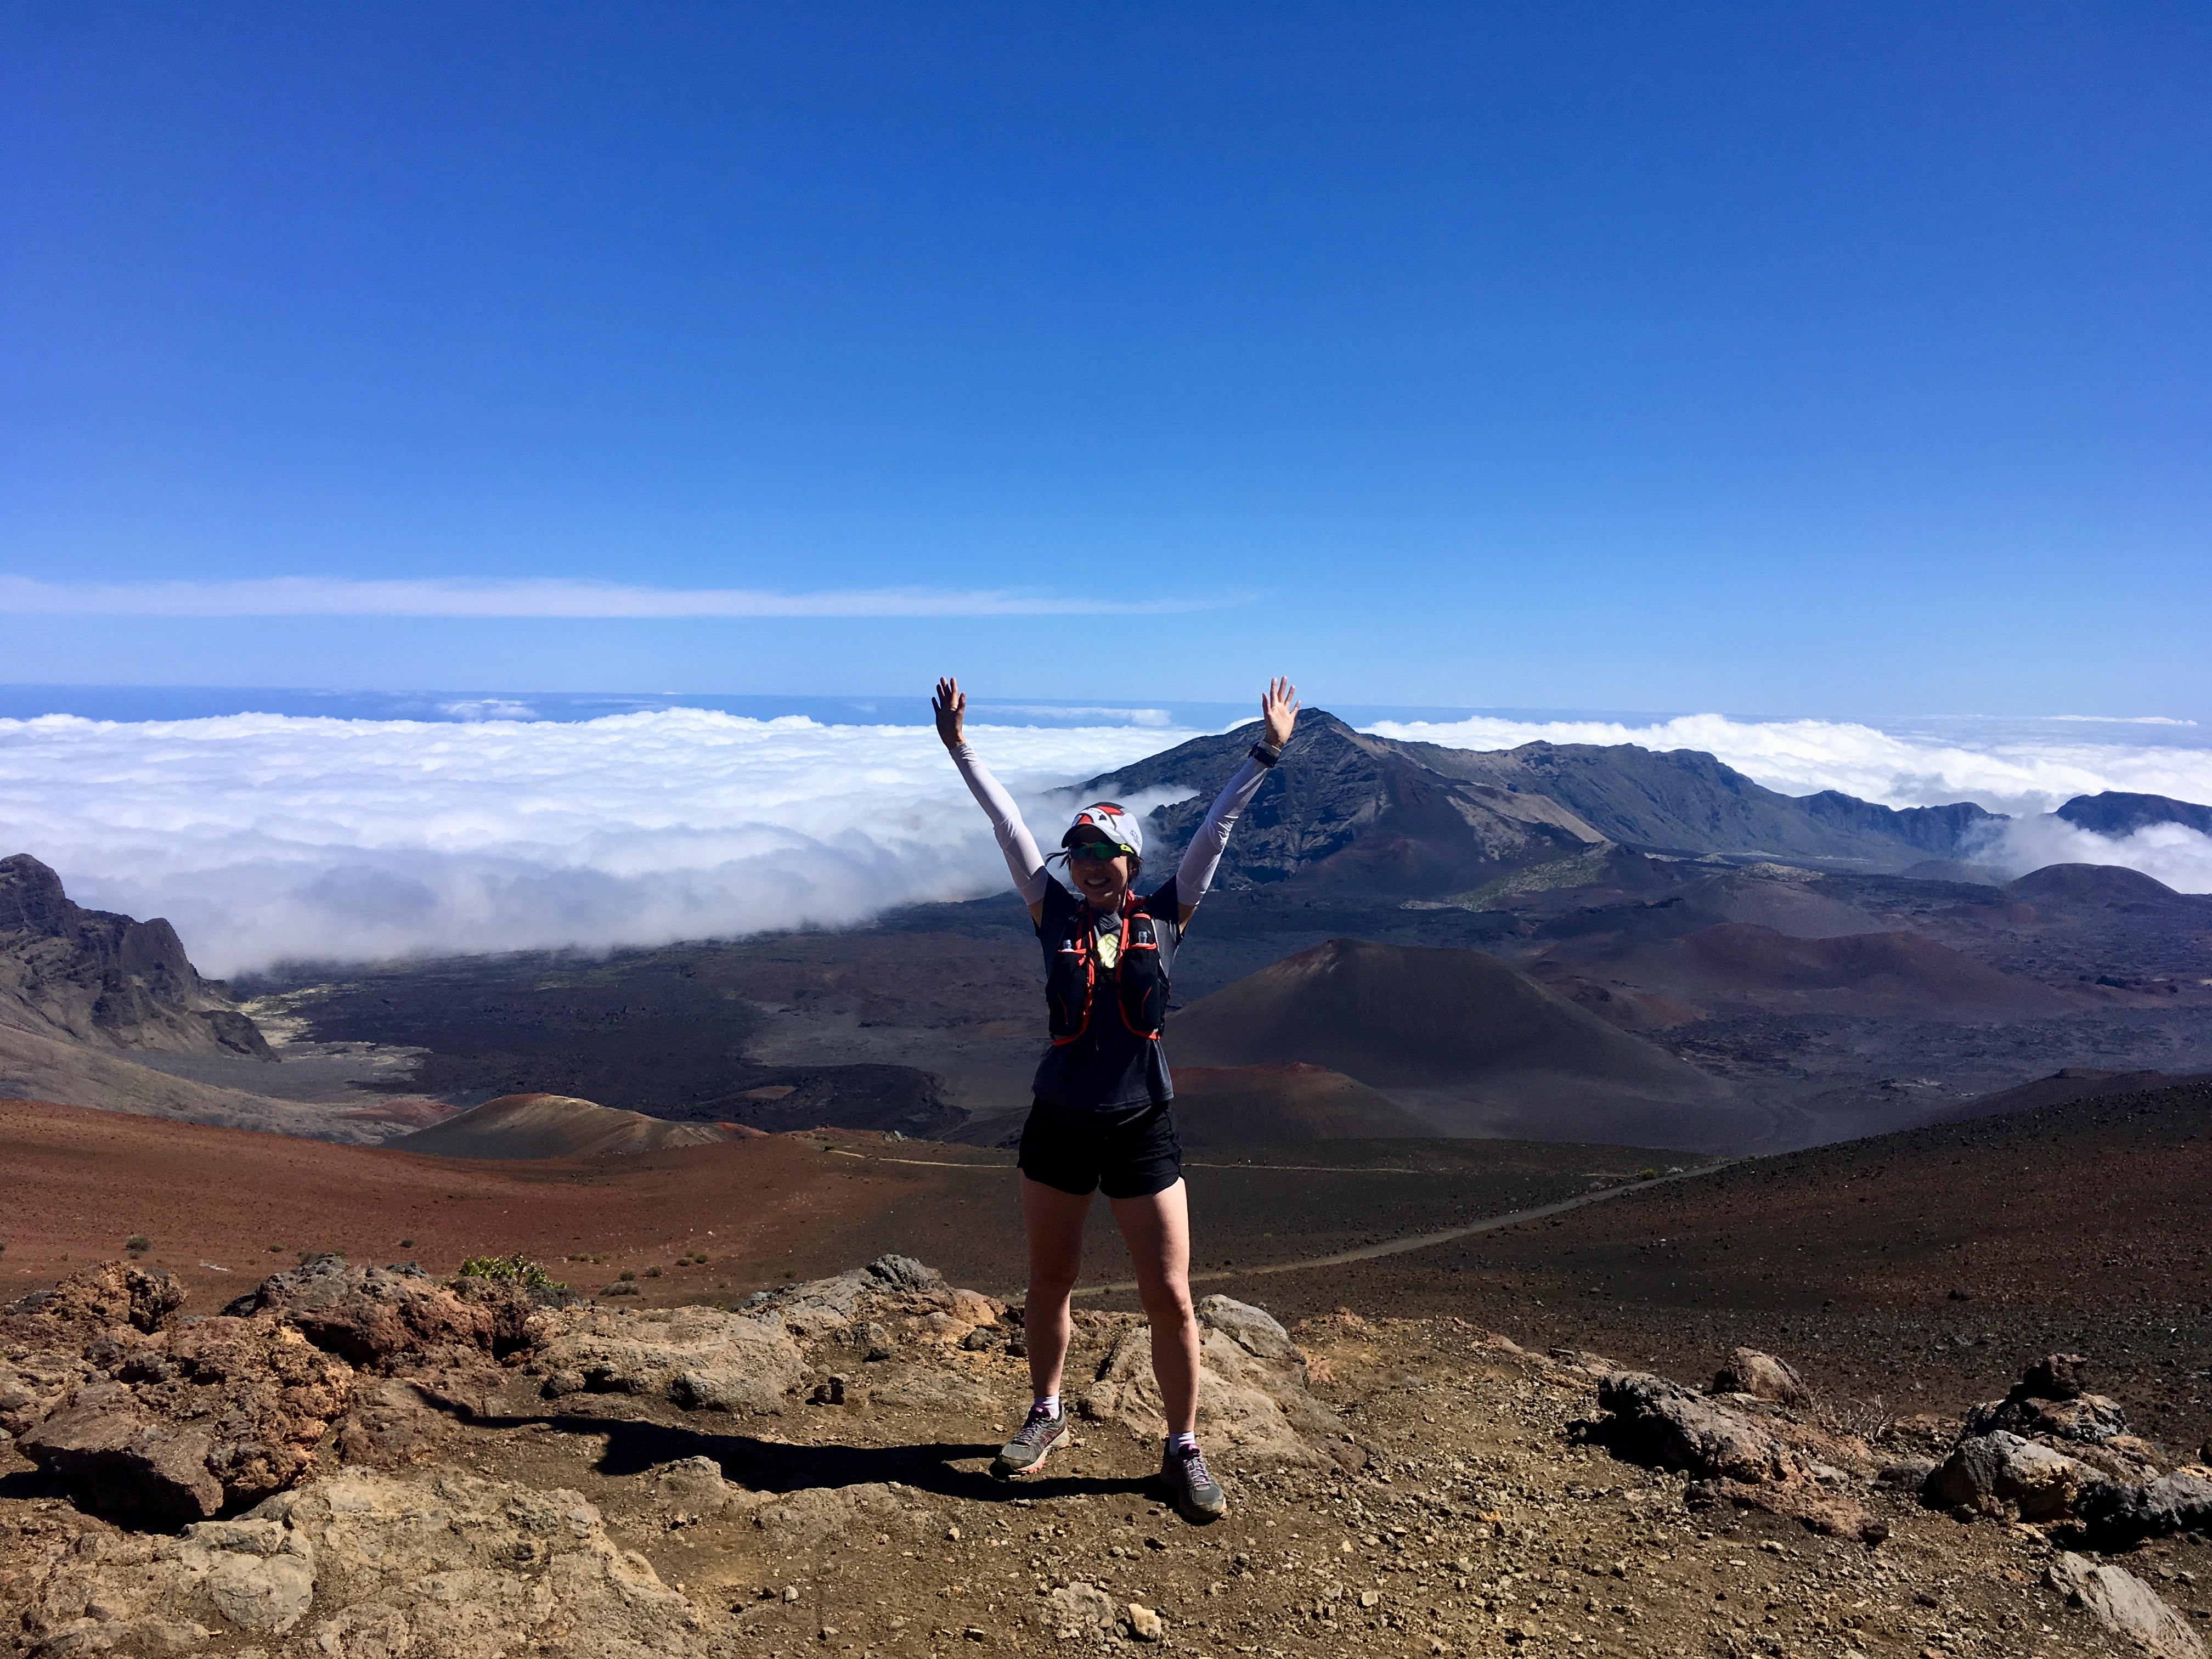 Author standing on the edge of the Haleakala Crater trail under blue skies.